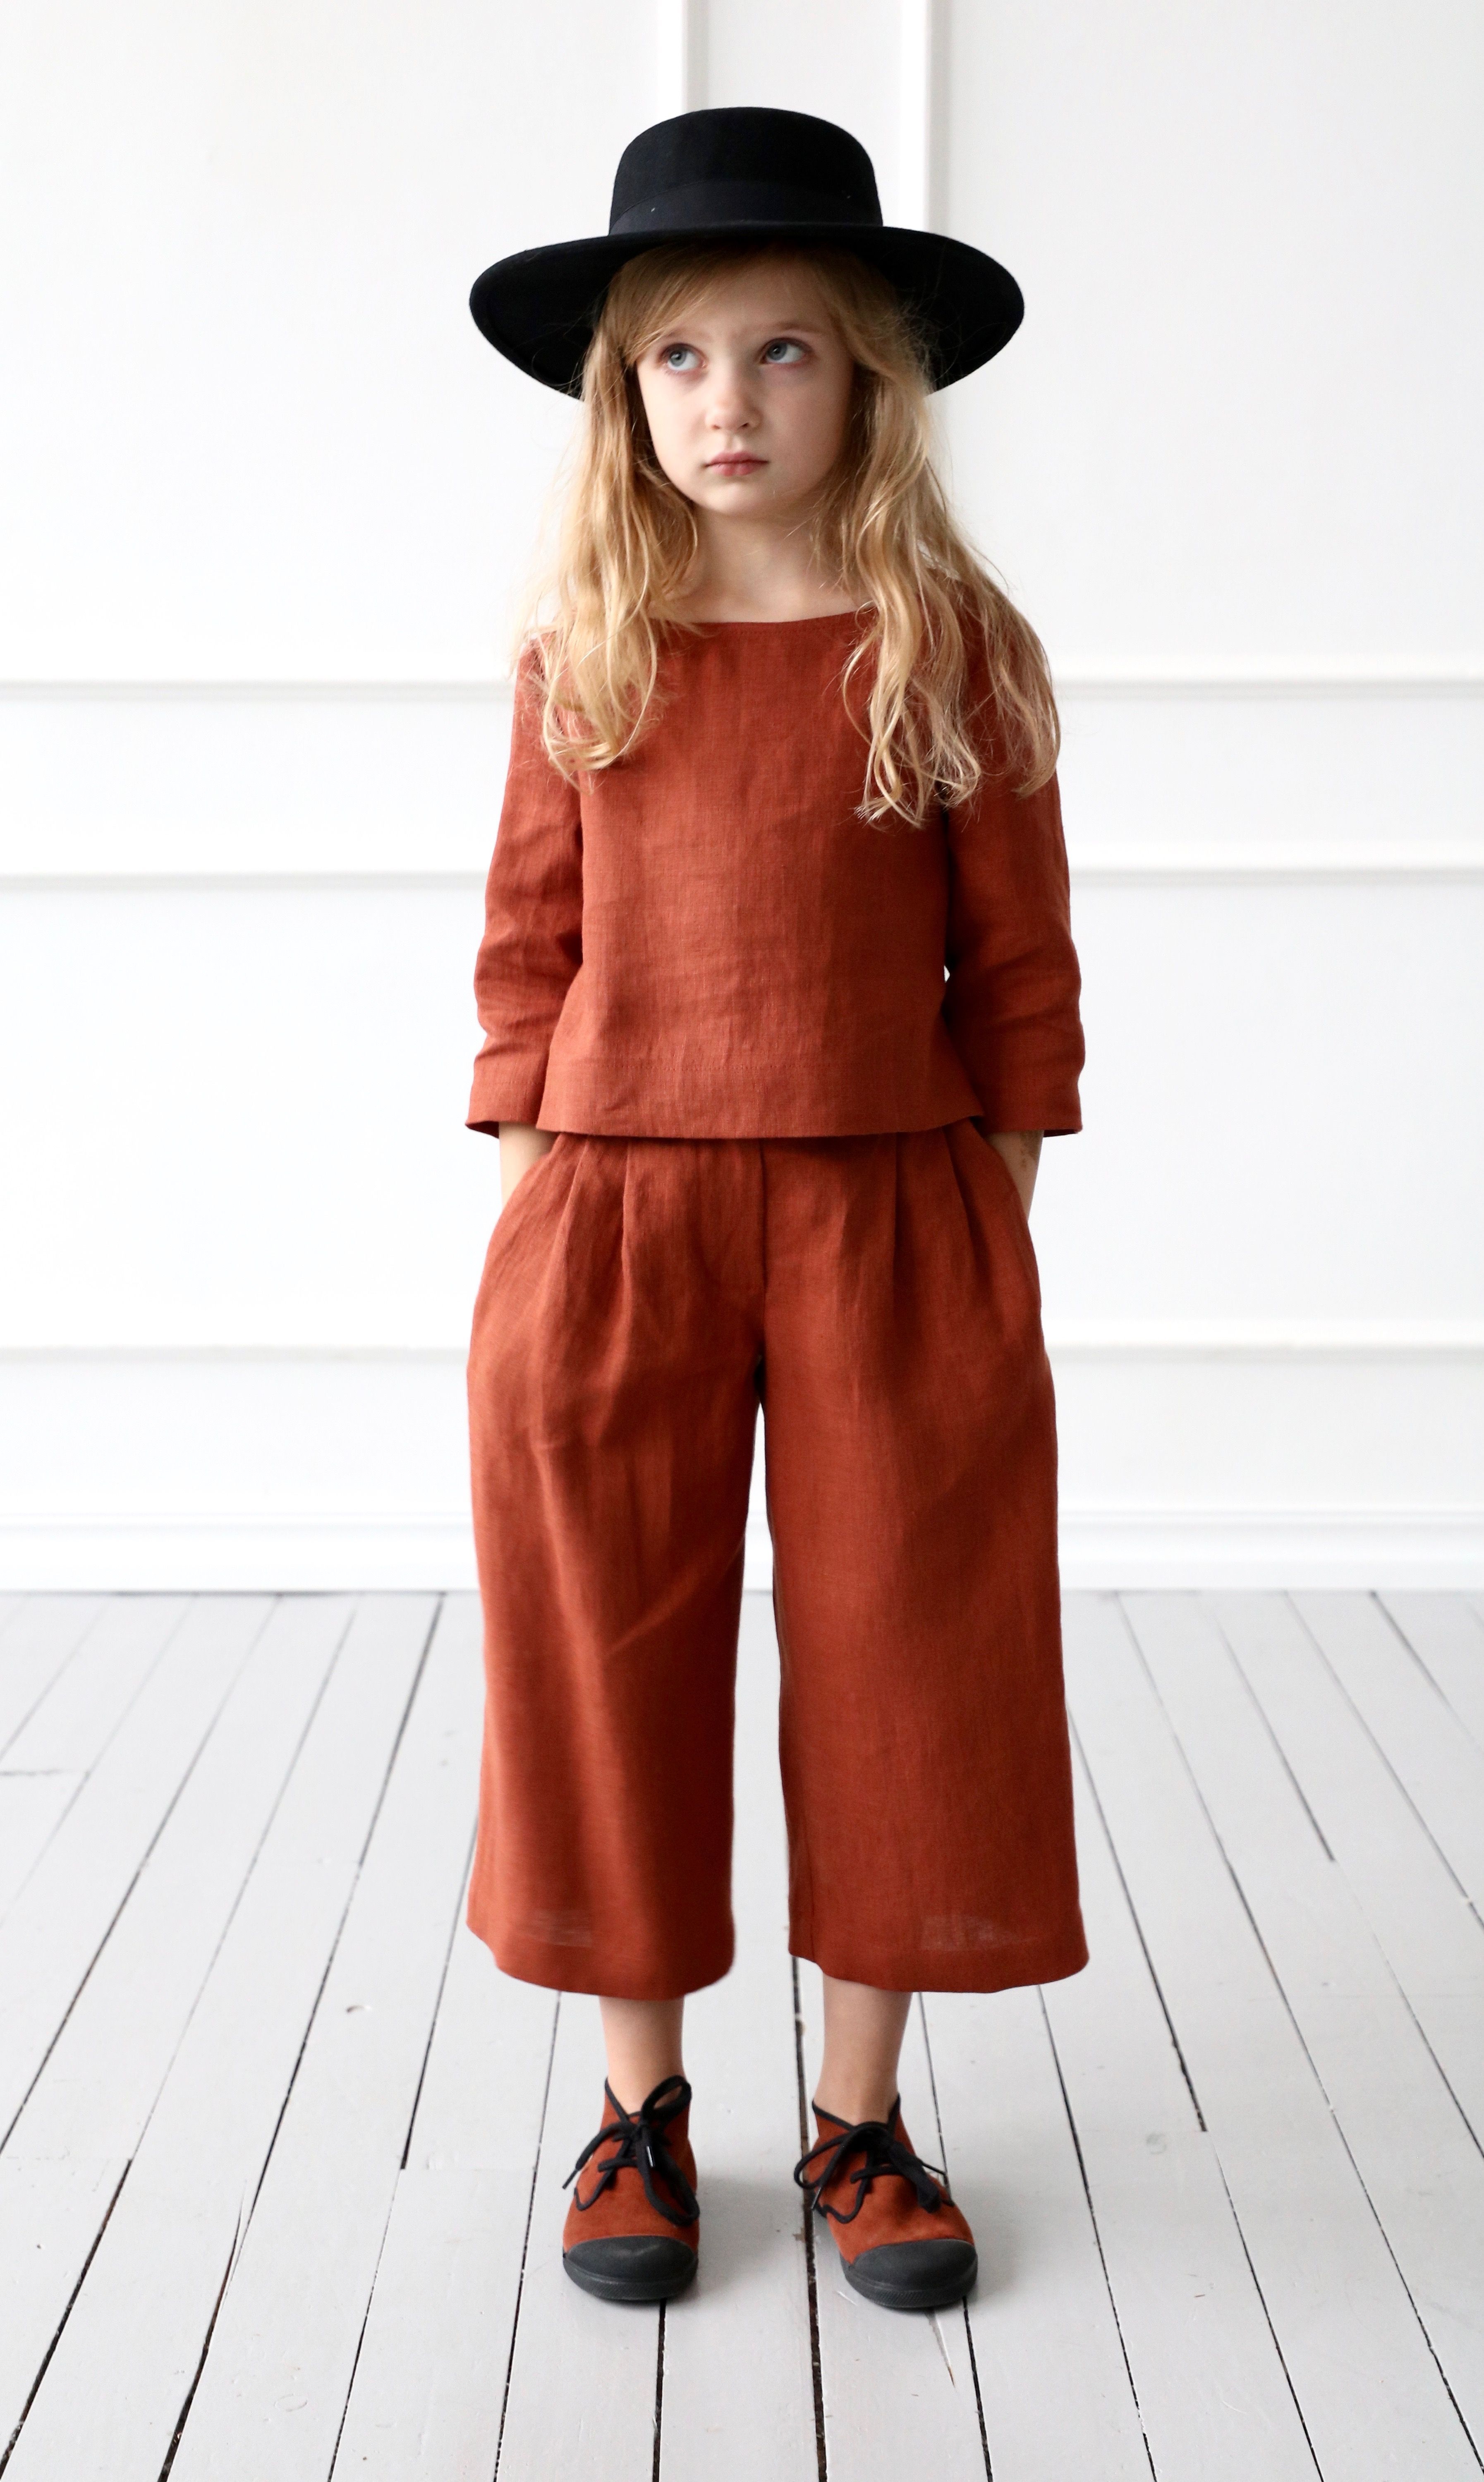 Linen culottes for girl/OFFON CLOTHING -   19 DIY Clothes For Kids dresses
 ideas